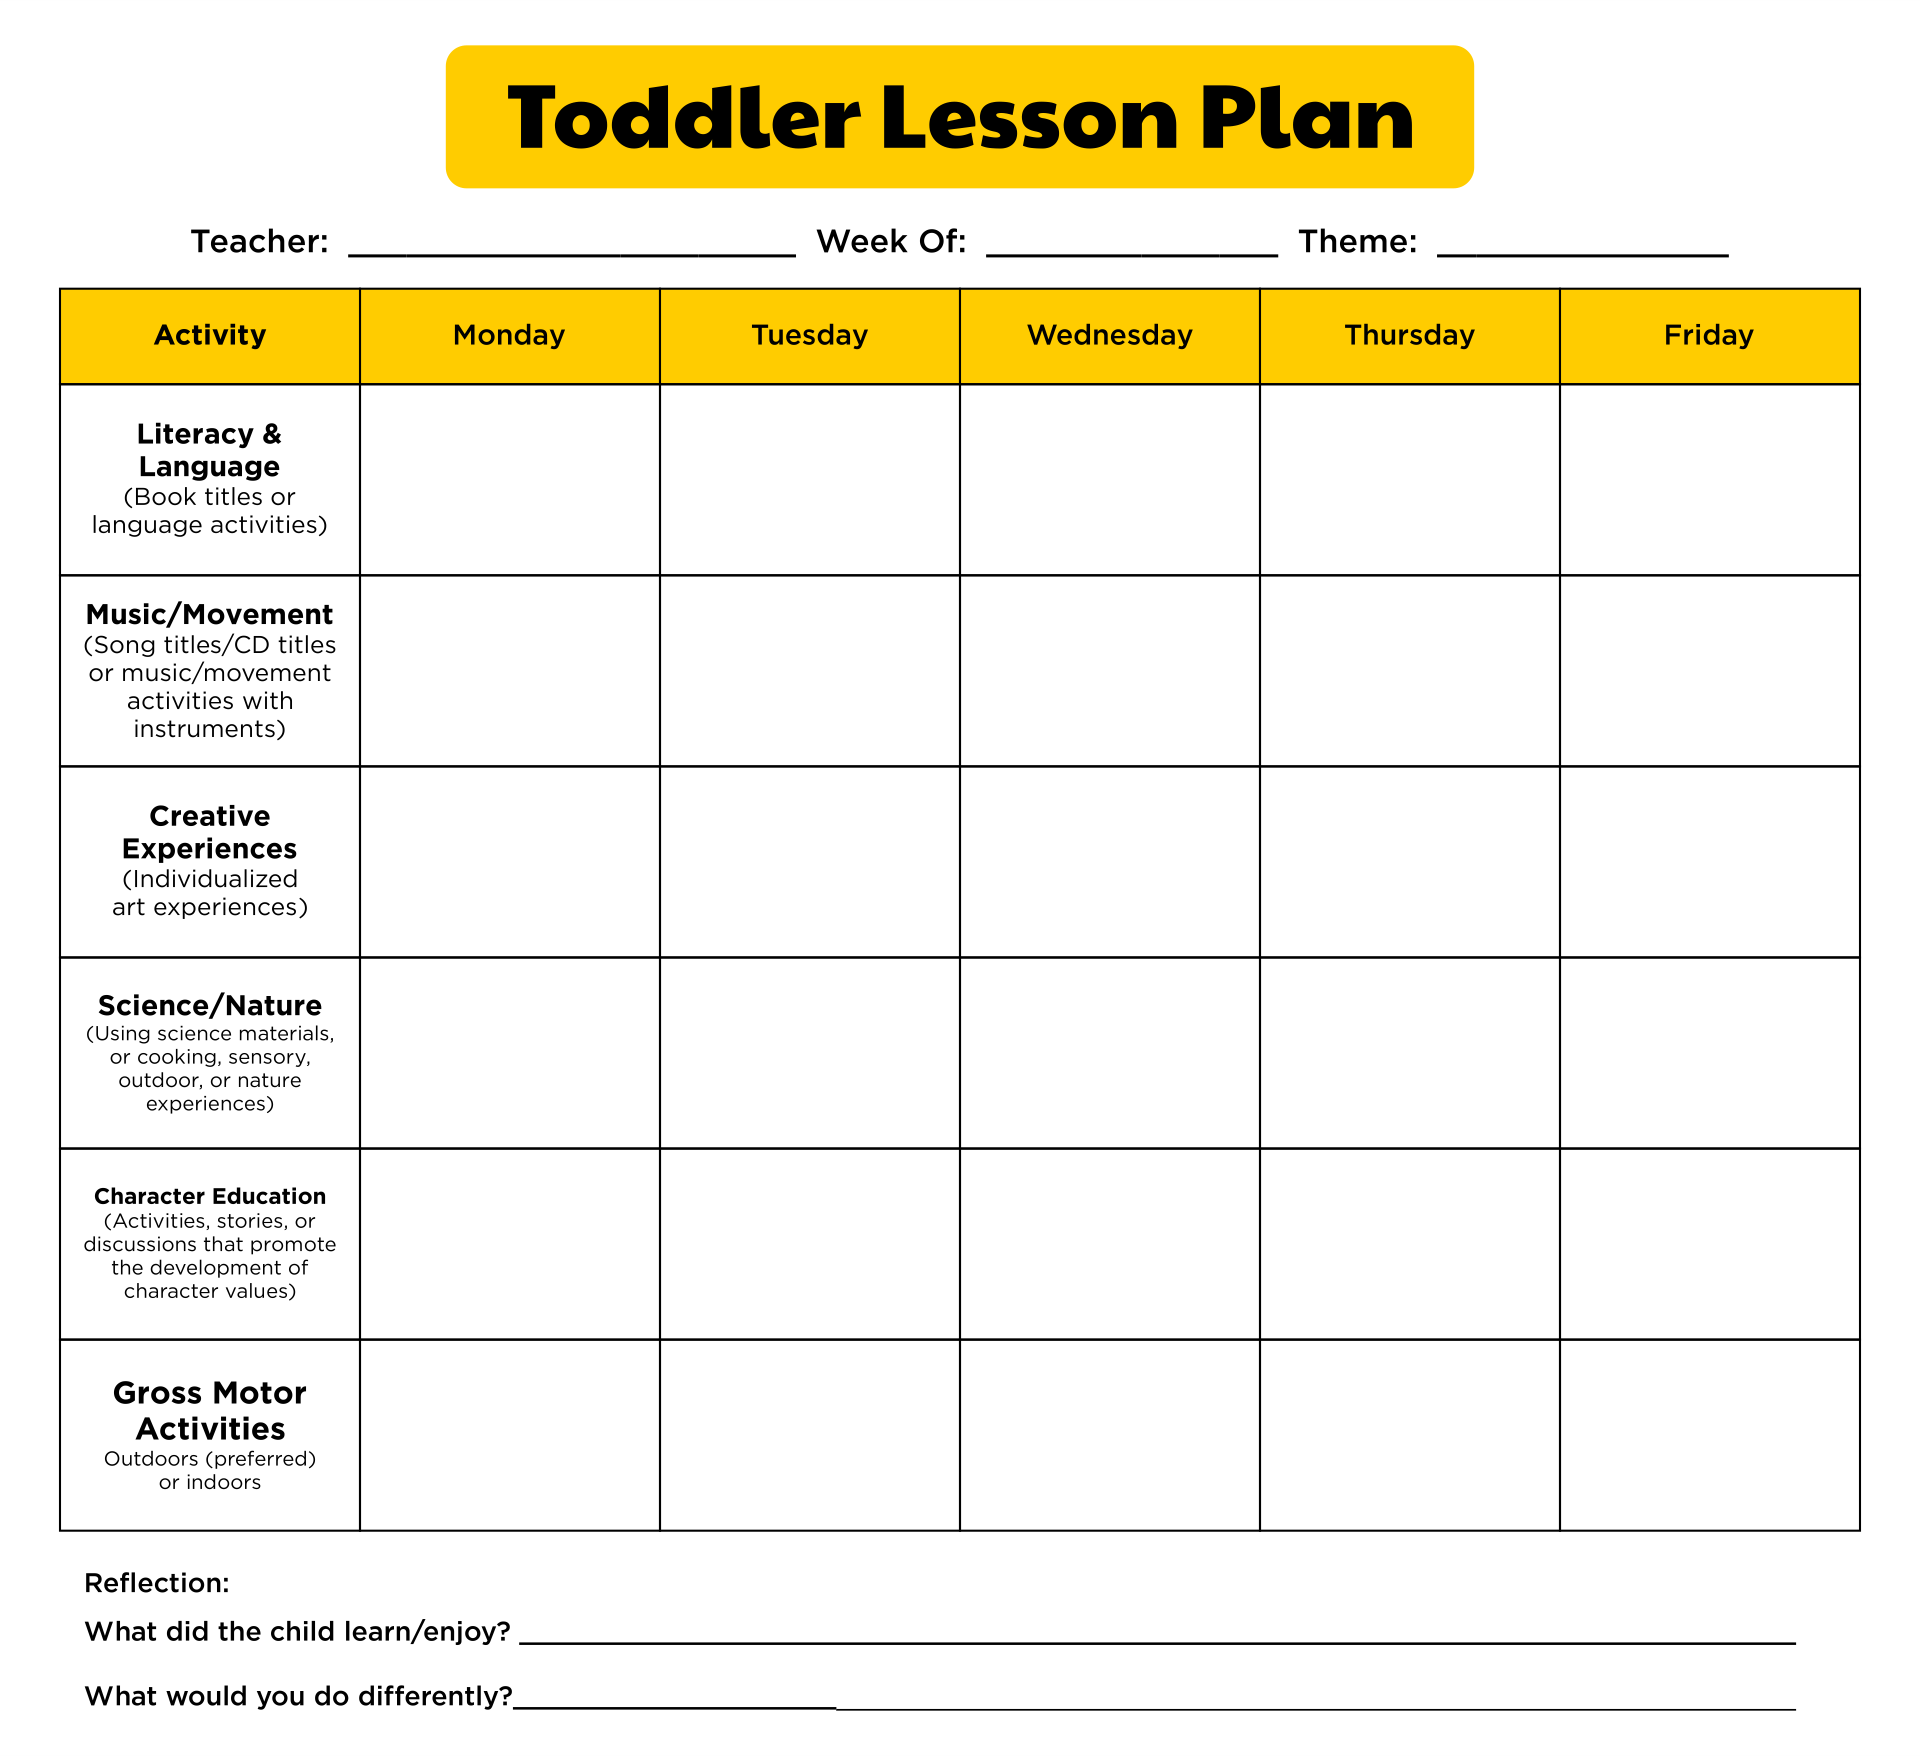 Toddler Lesson Plan Template